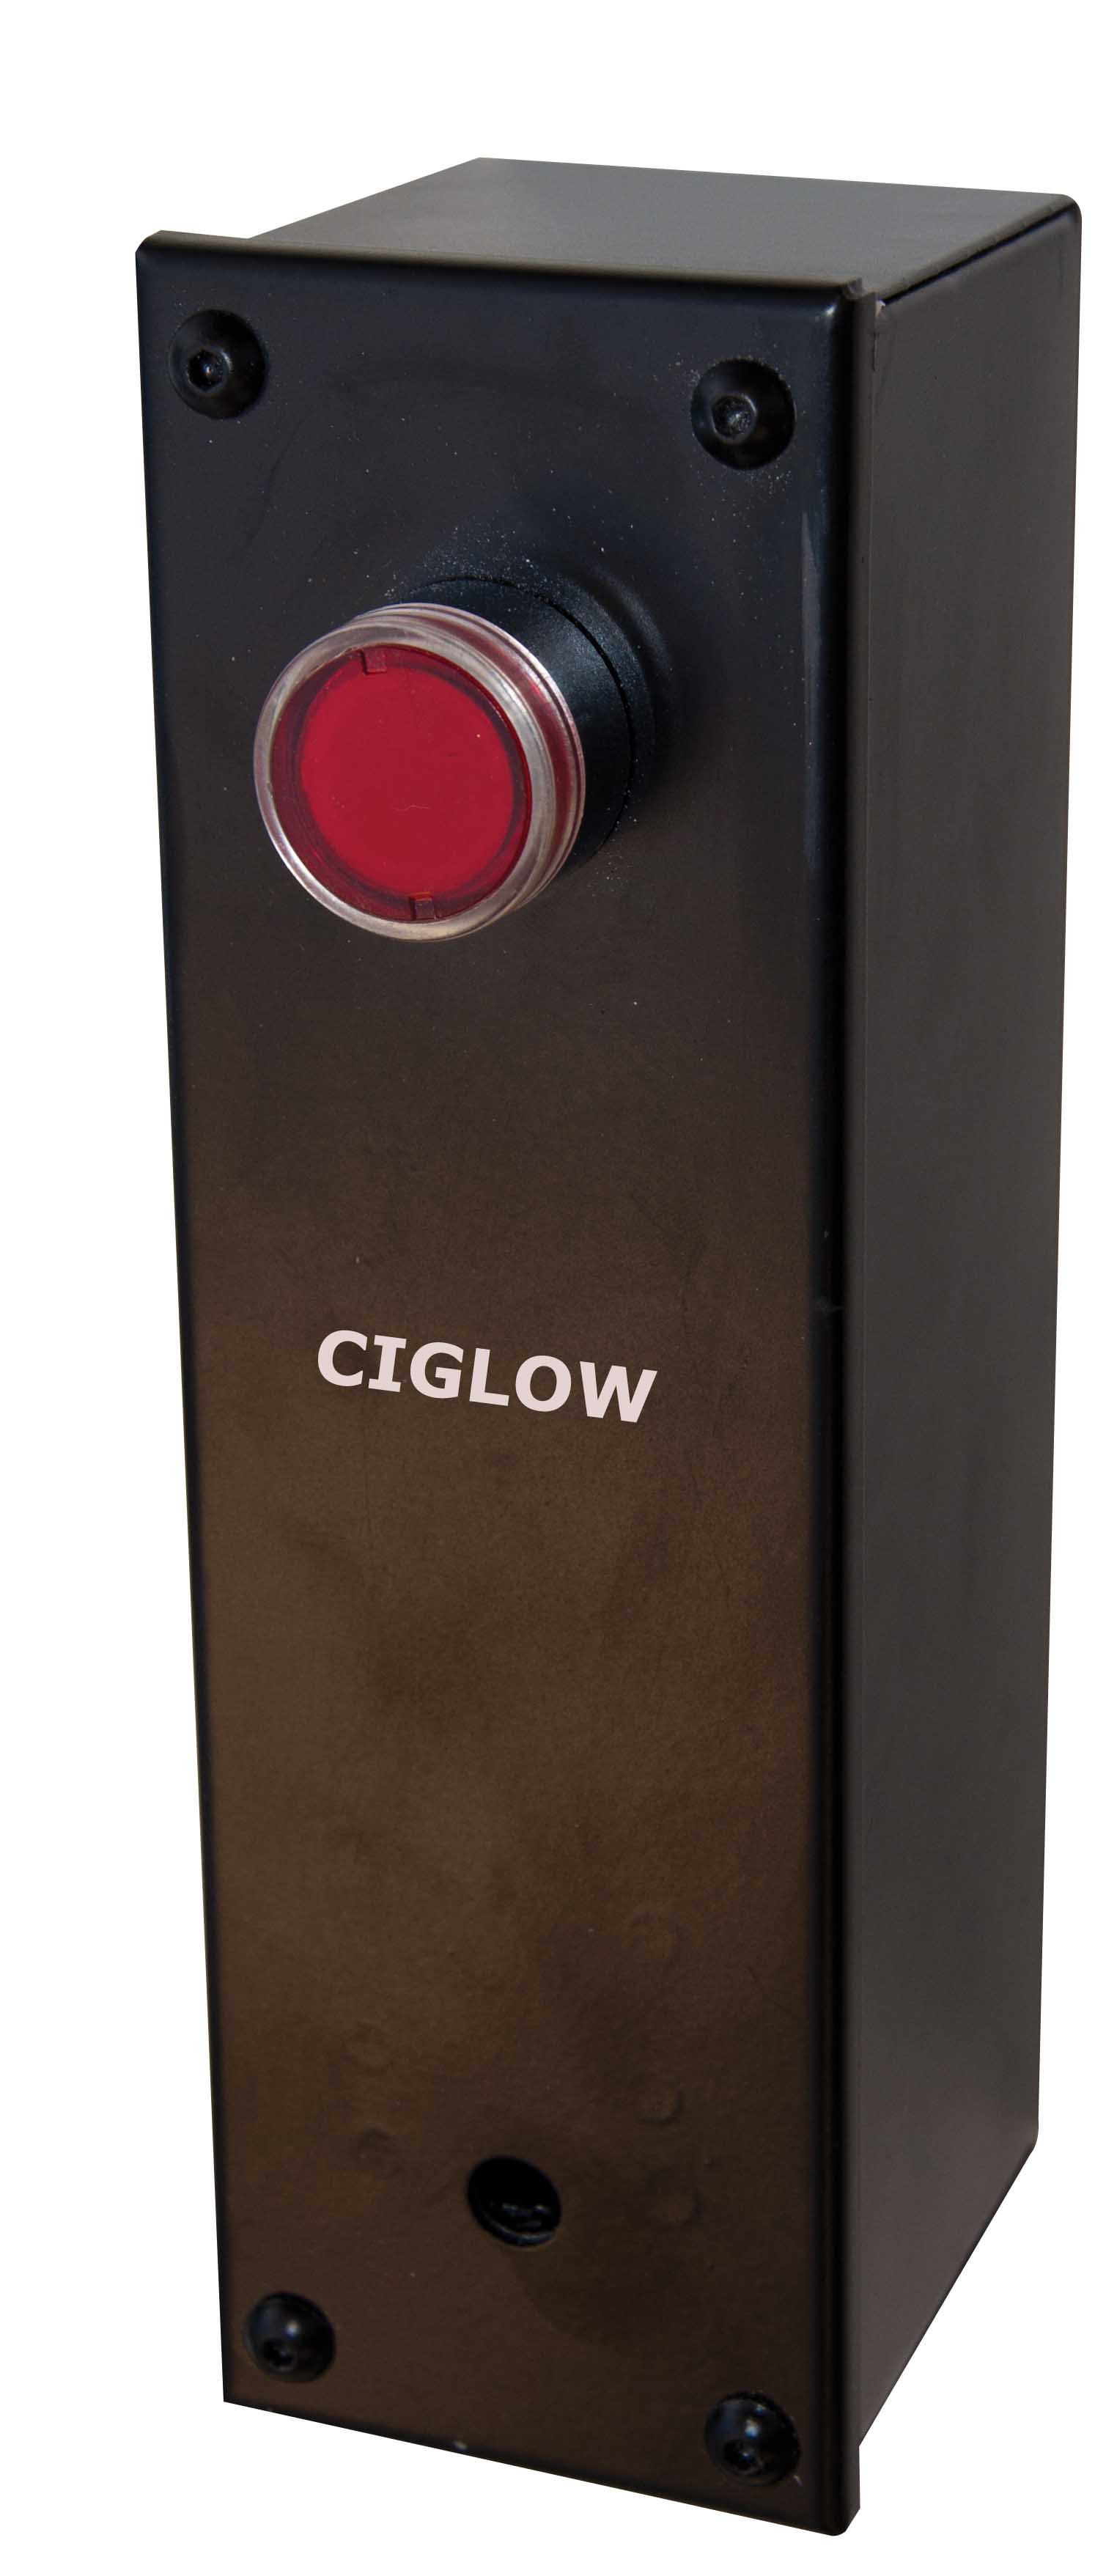 Impressive Features to Consider in Emergency Lighters